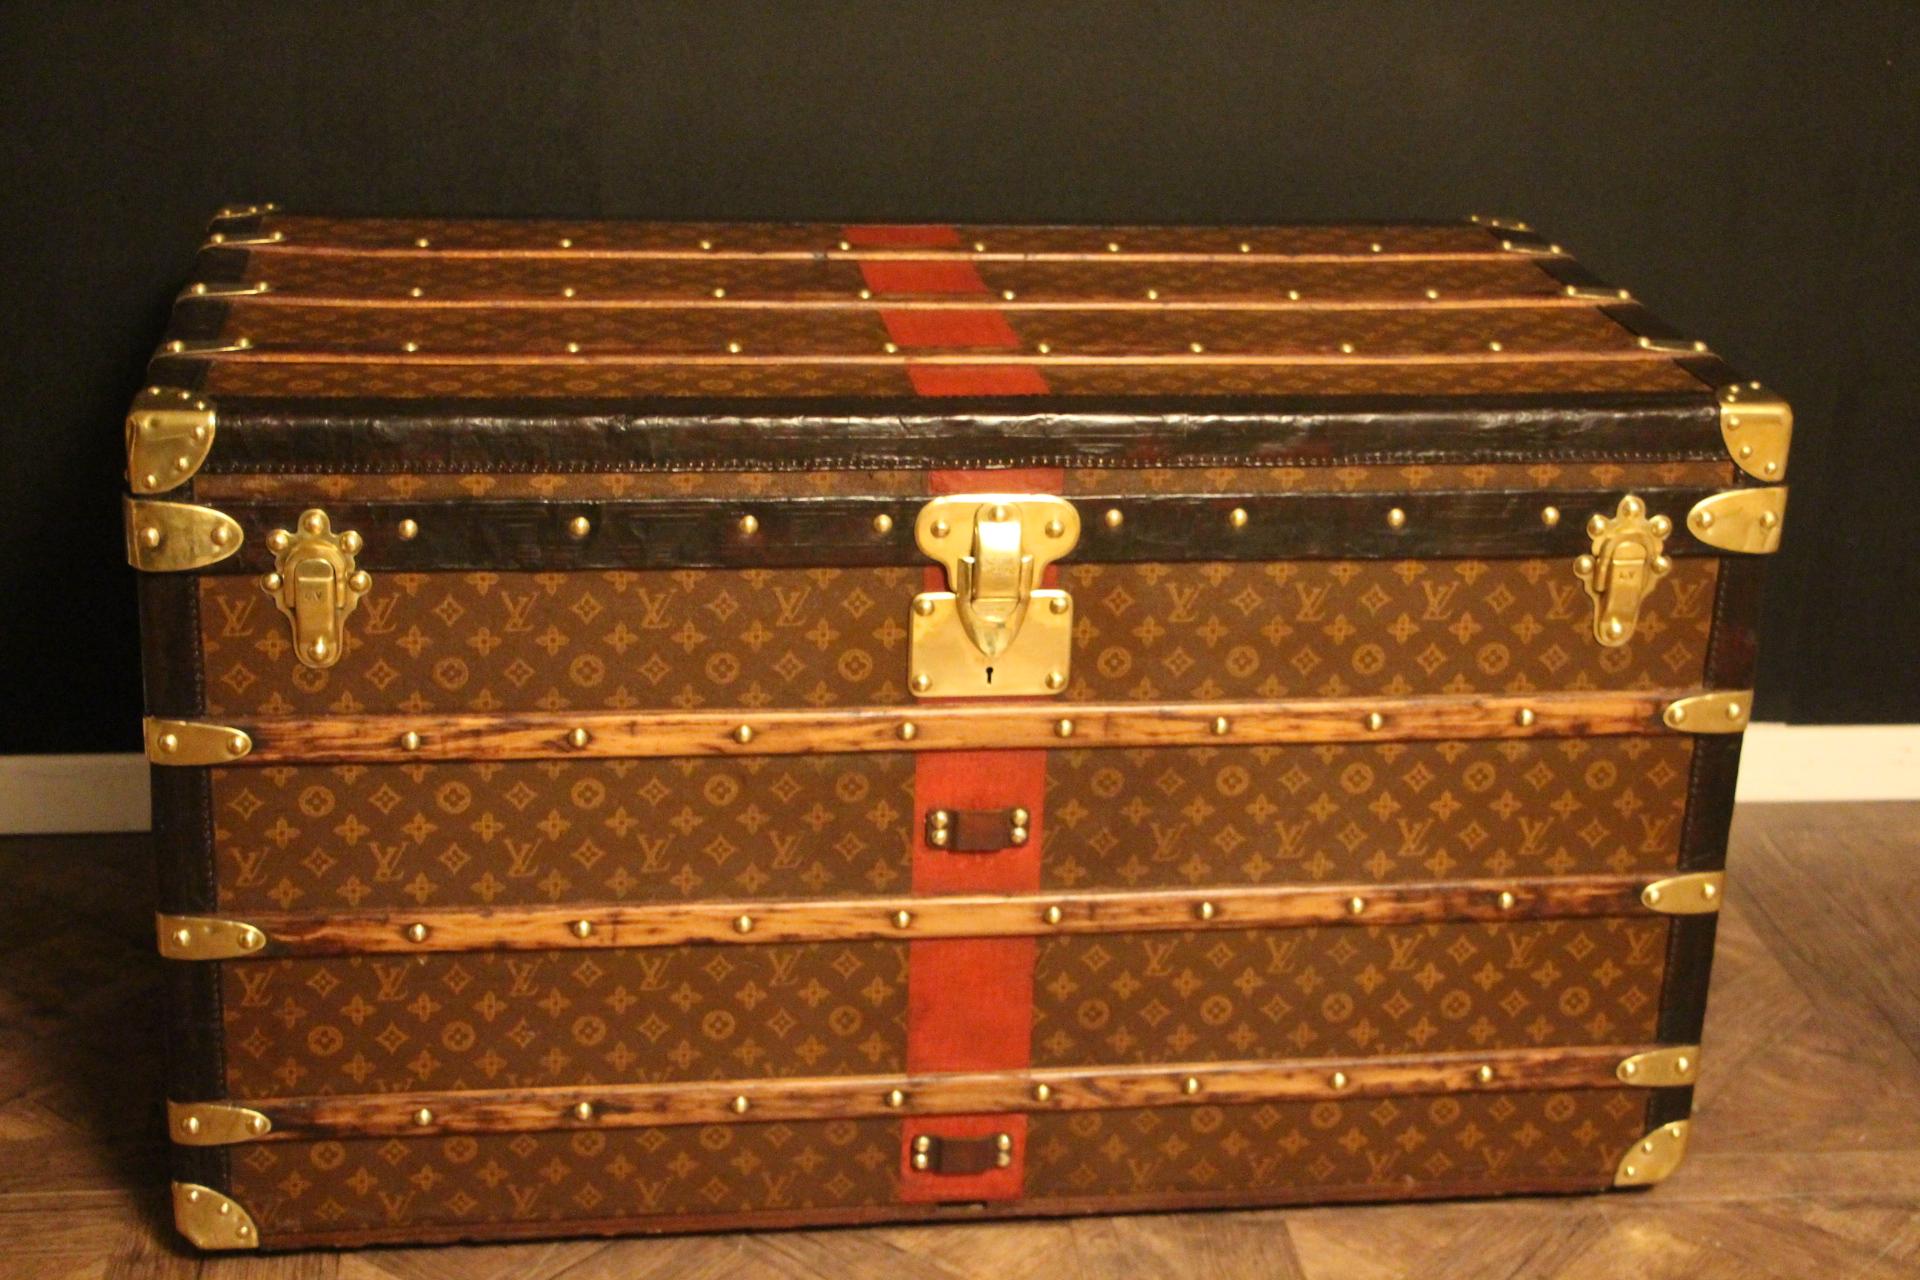 This superb Louis Vuitton steamer trunk features stenciled monogram canvas, deep chocolate color leather trim, LV stamped solid brass locks and studs as well as solid brass side handles and brass corners. It features a customized red painted stripe